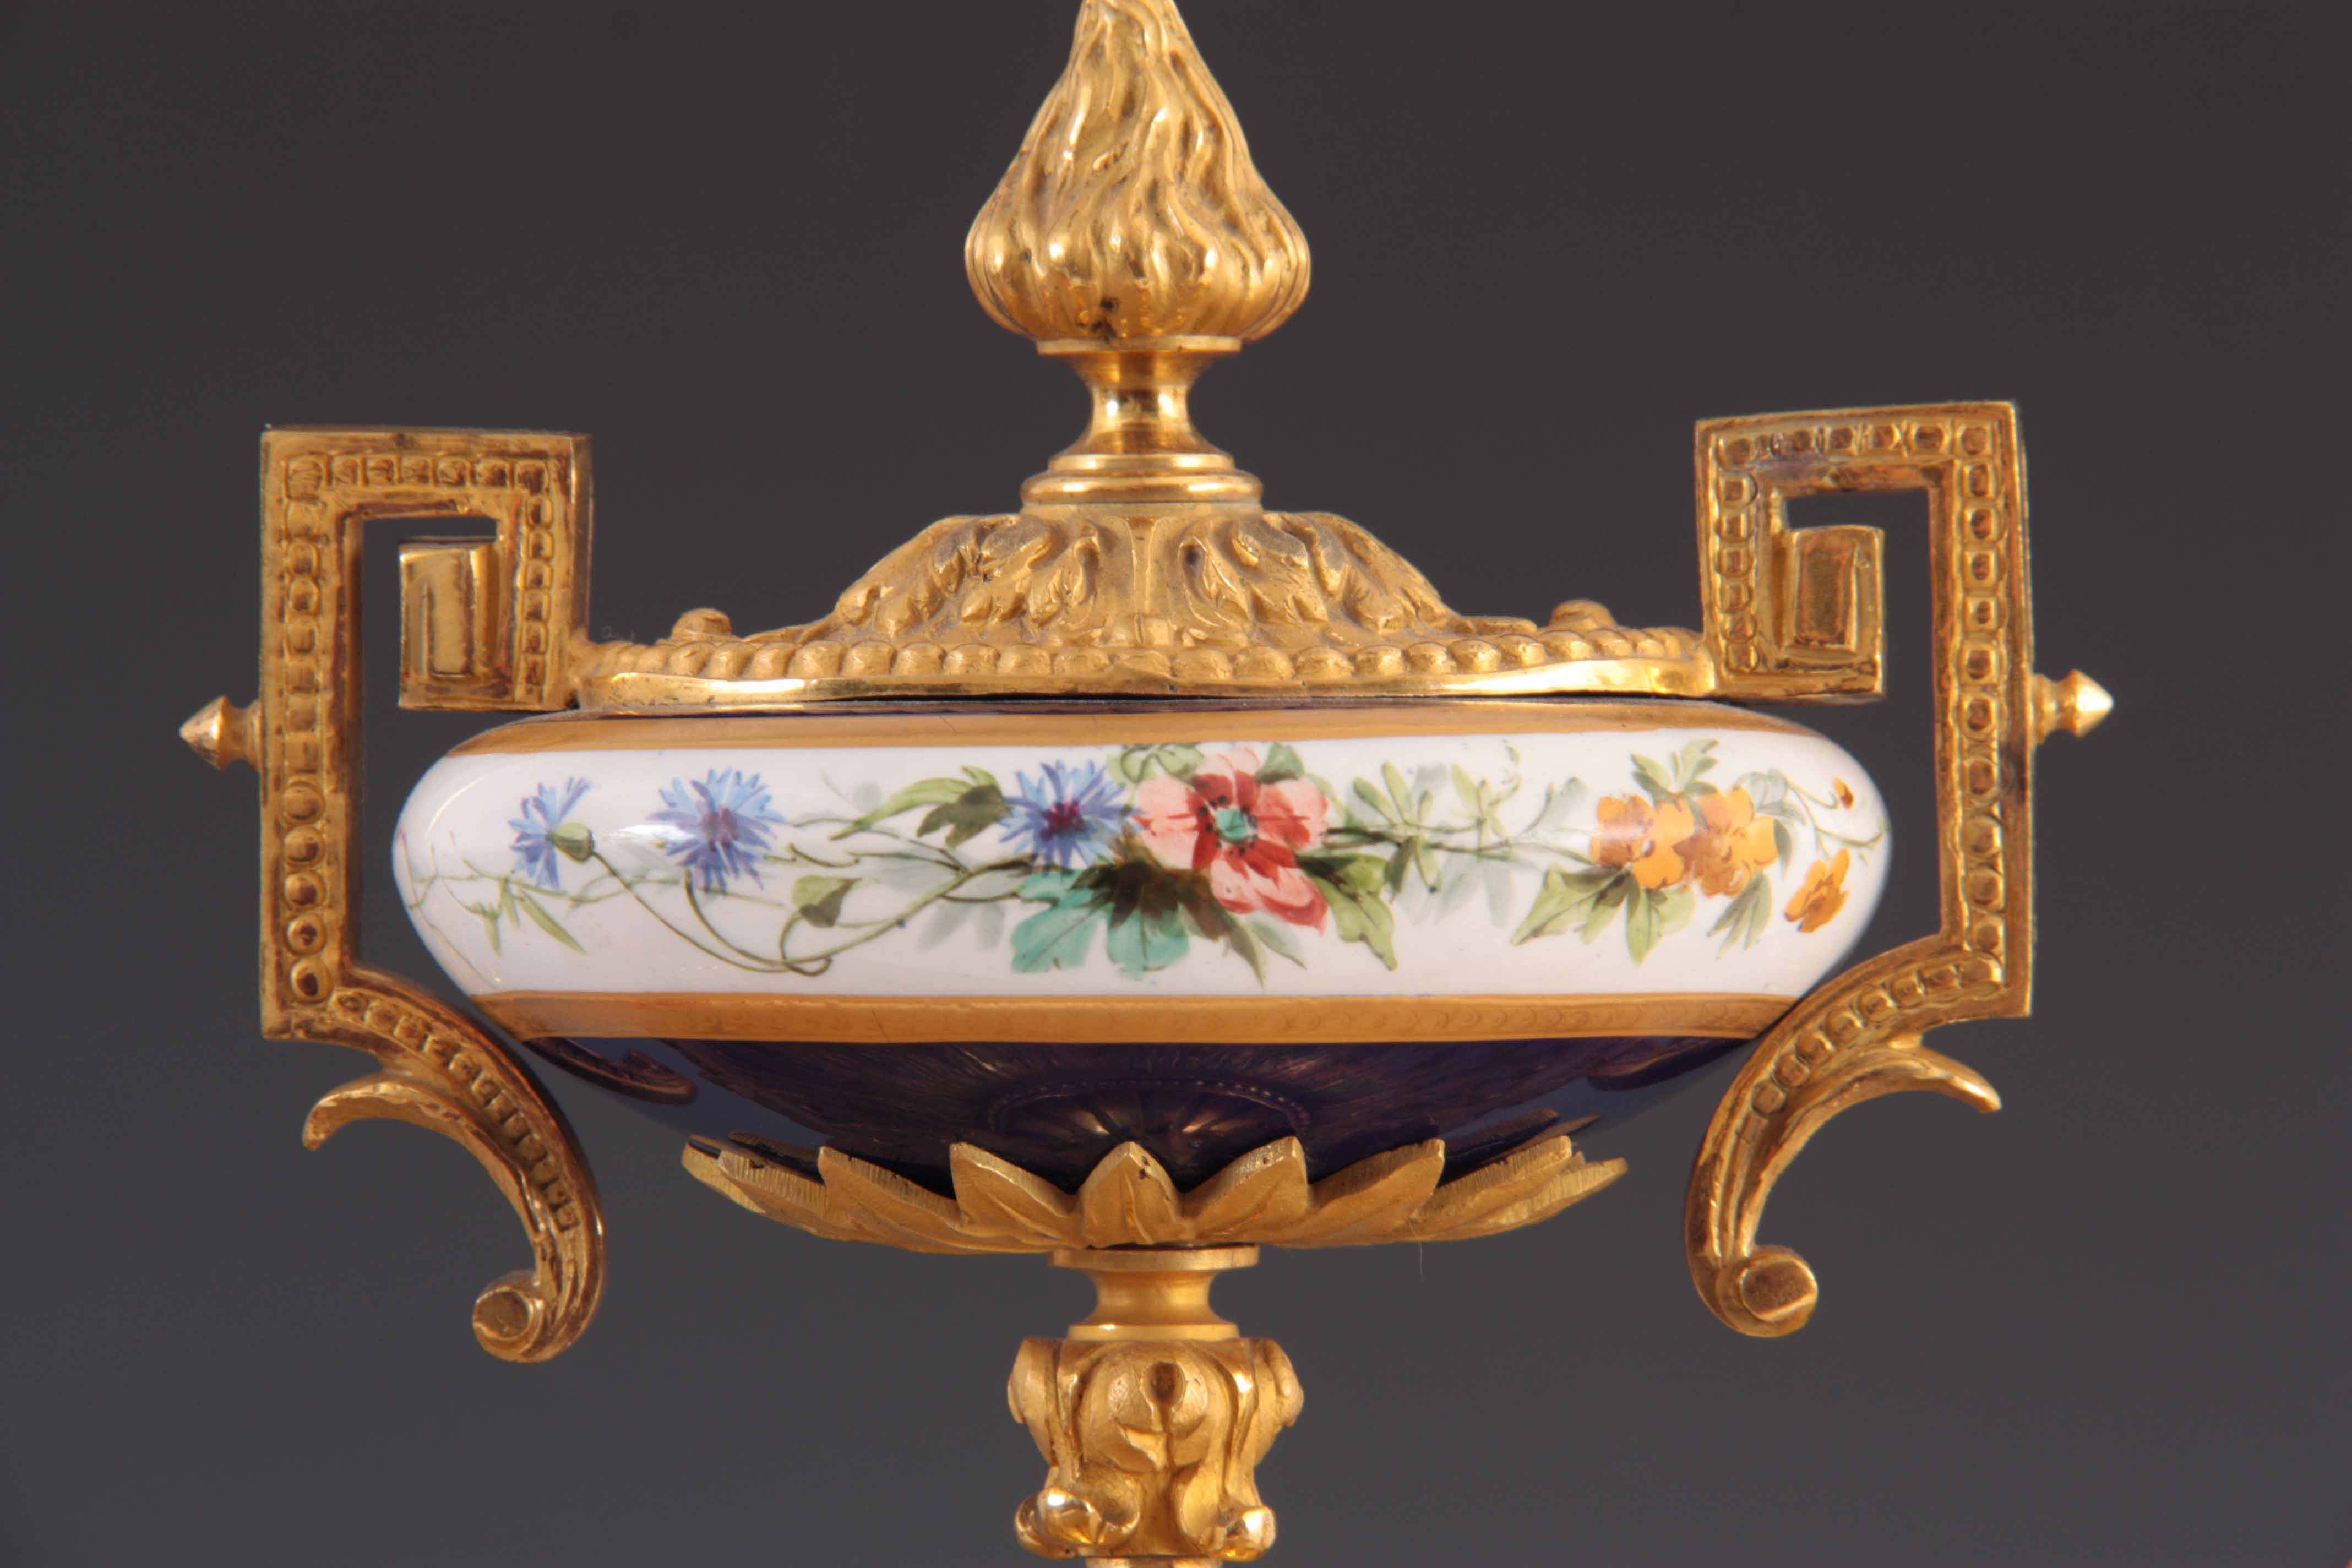 A LATE 19TH CENTURY FRENCH ORMOLU AND PORCELAIN PANEL MANTEL CLOCK the gilt brass case with chased - Image 8 of 8